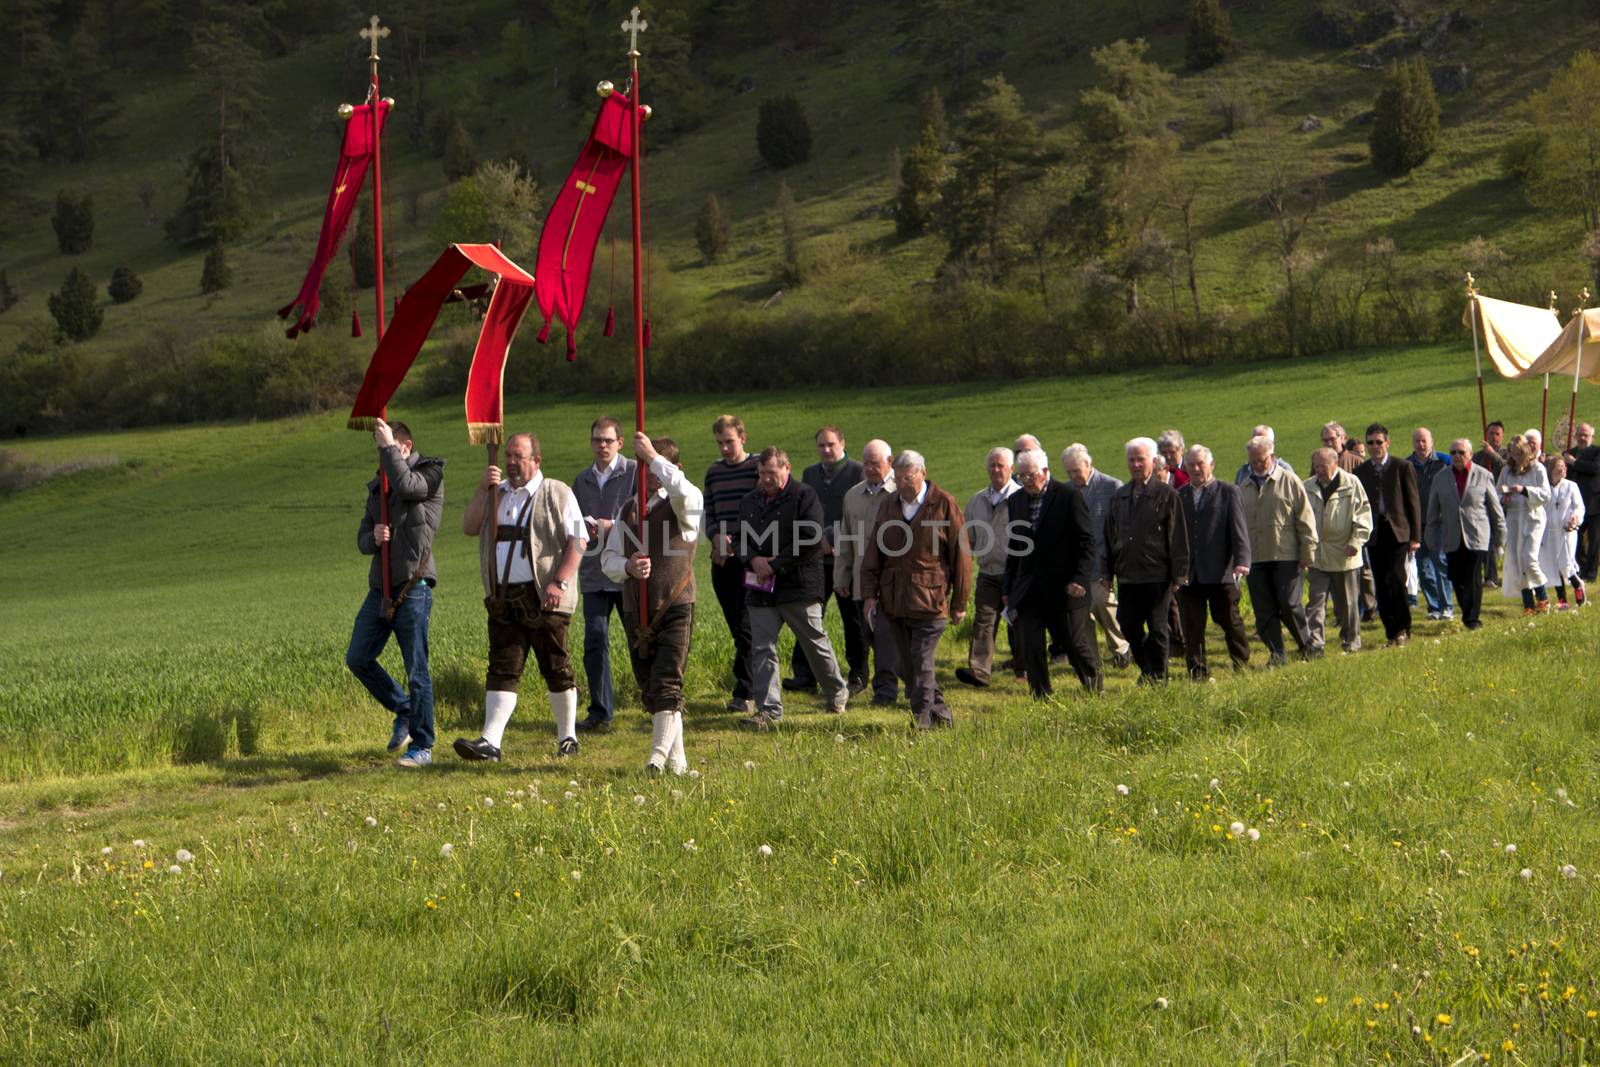 Ascension Day Procession in Bavaria in Germany